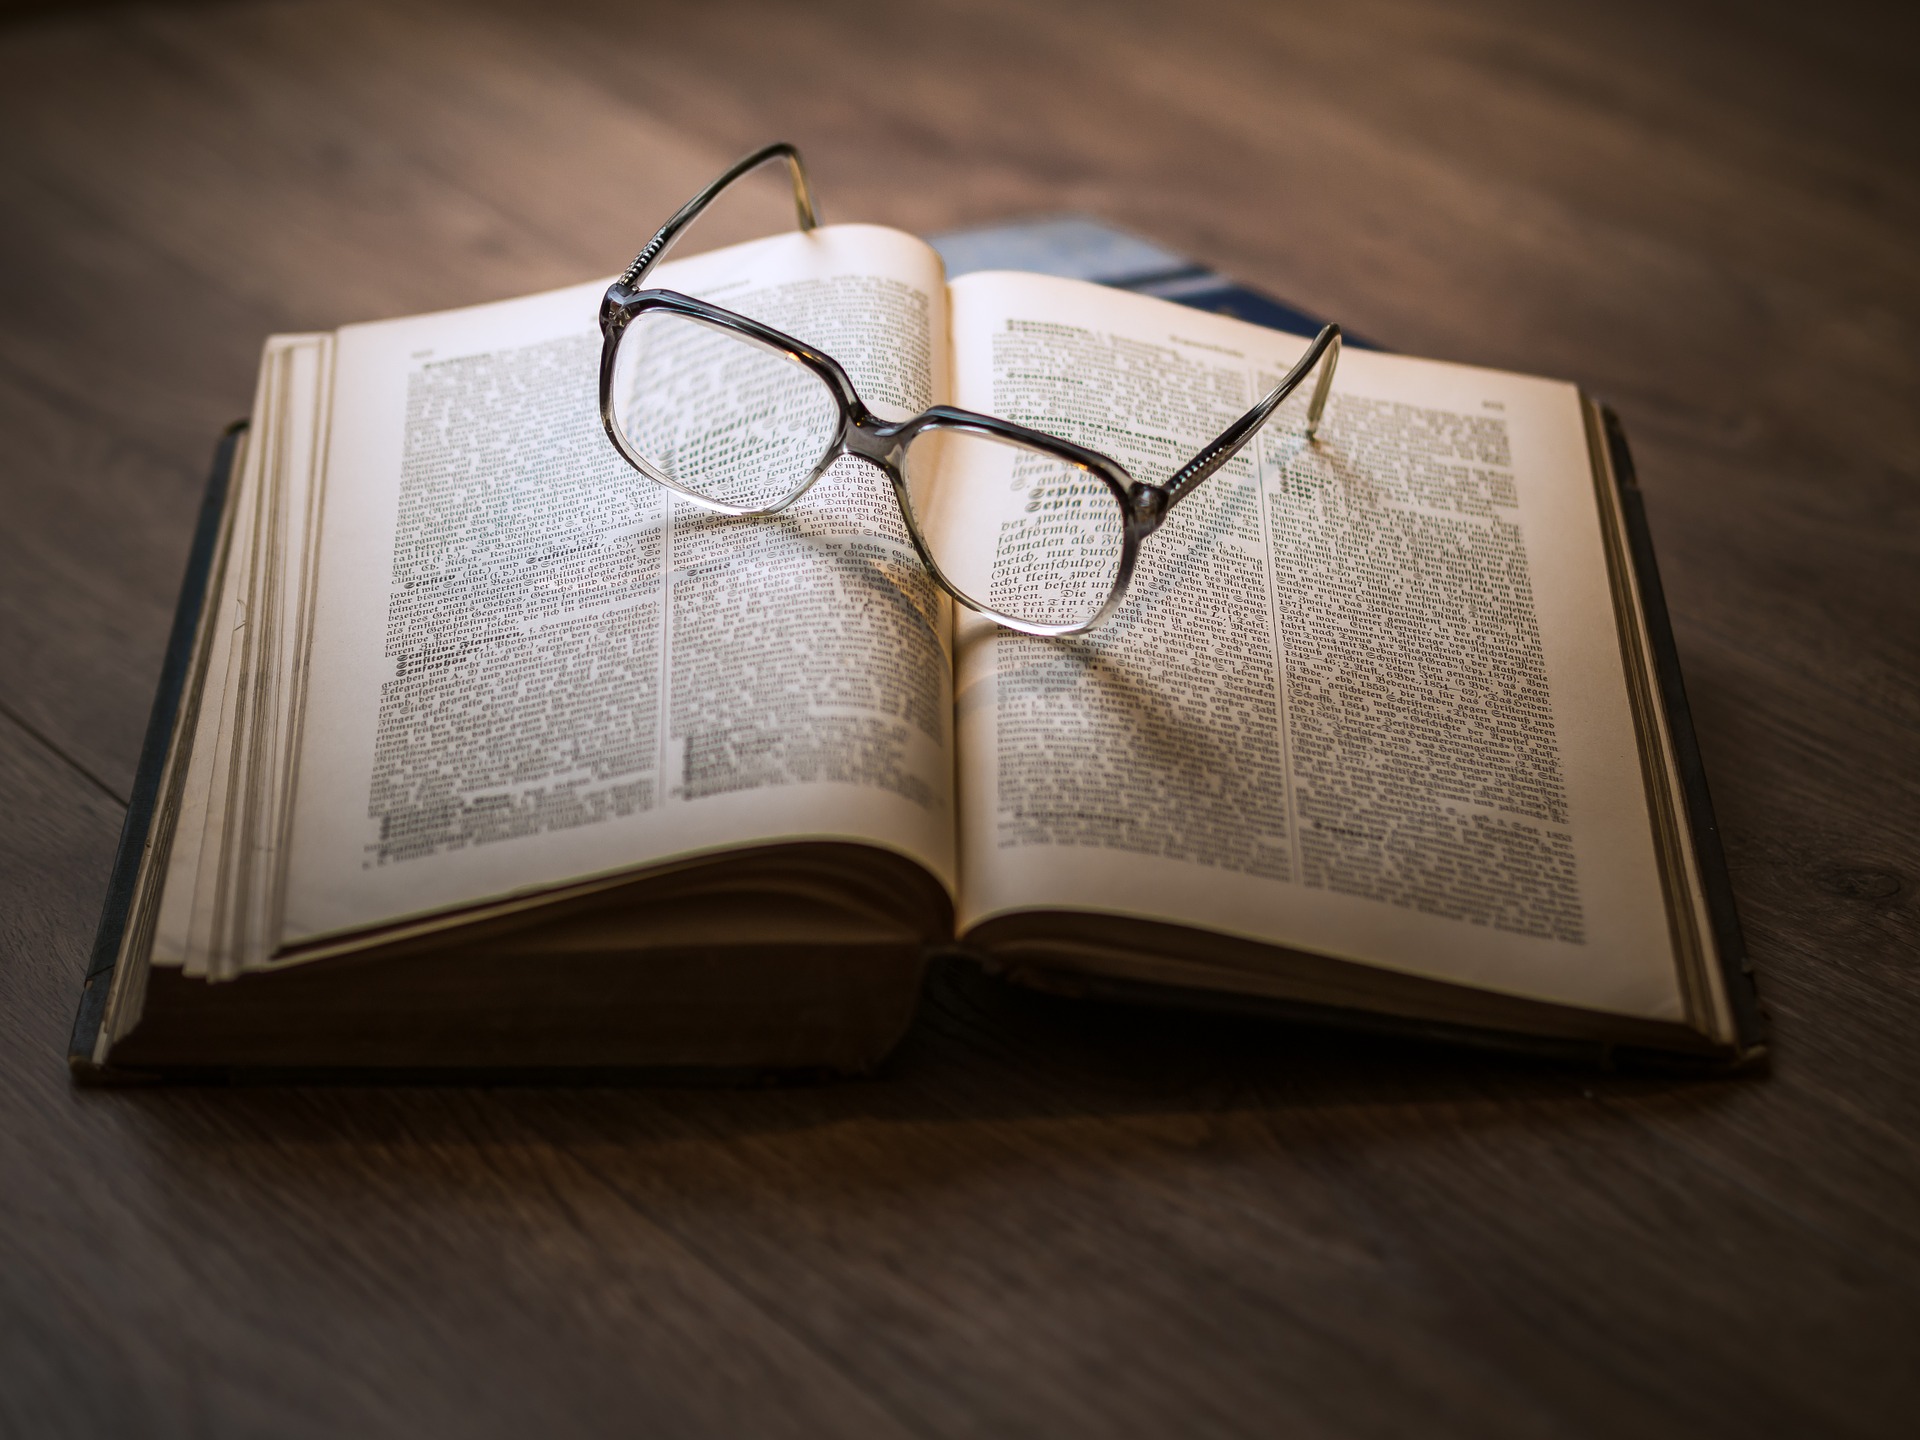 Decorative image of a book and pair of glasses